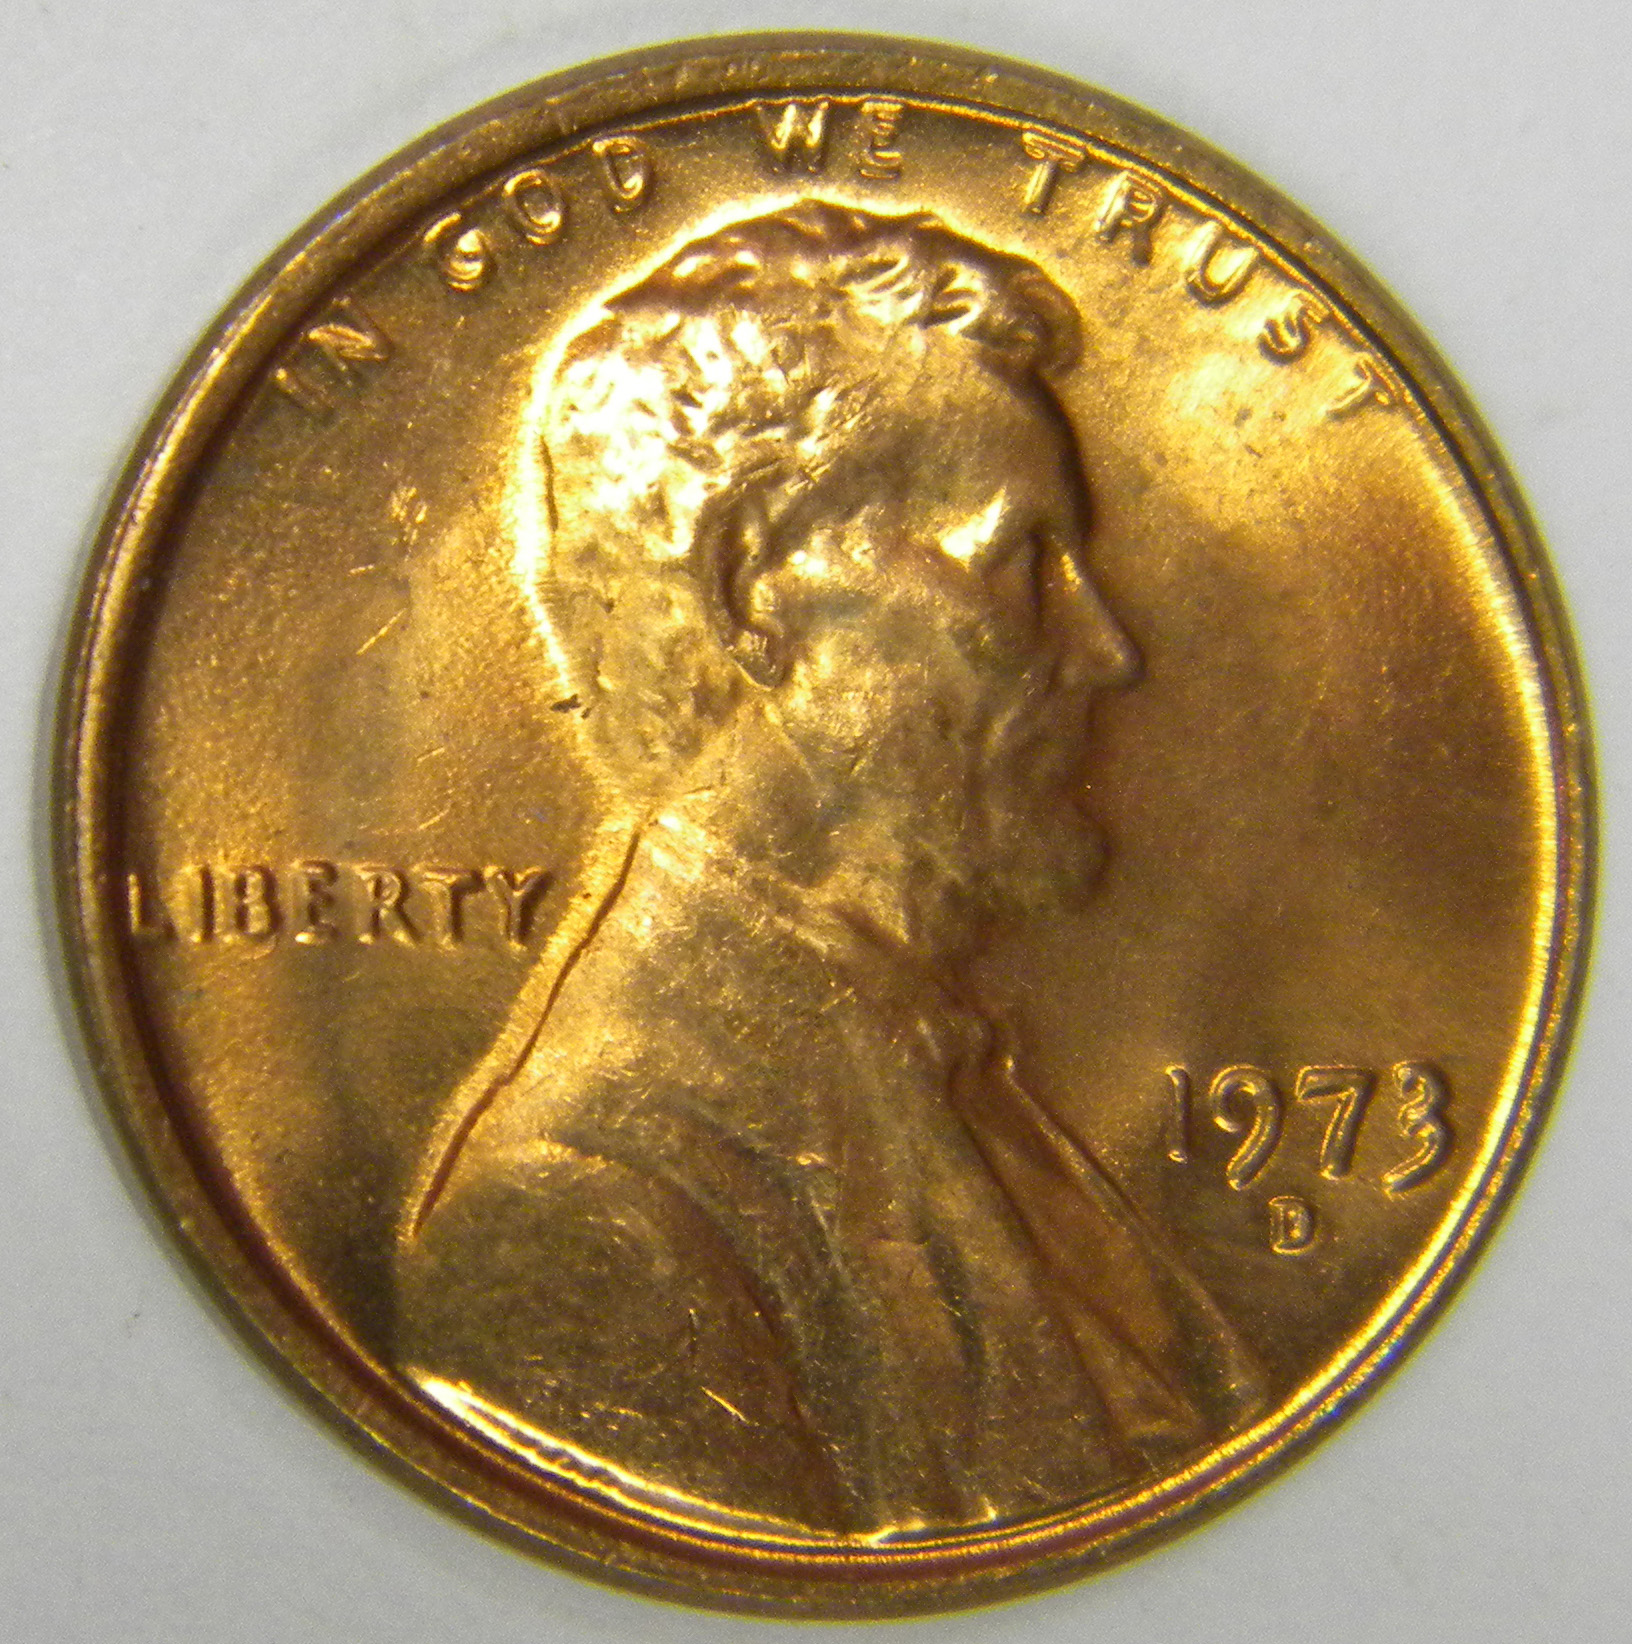 1973 D Lincoln Penny Obverse2a.jpg